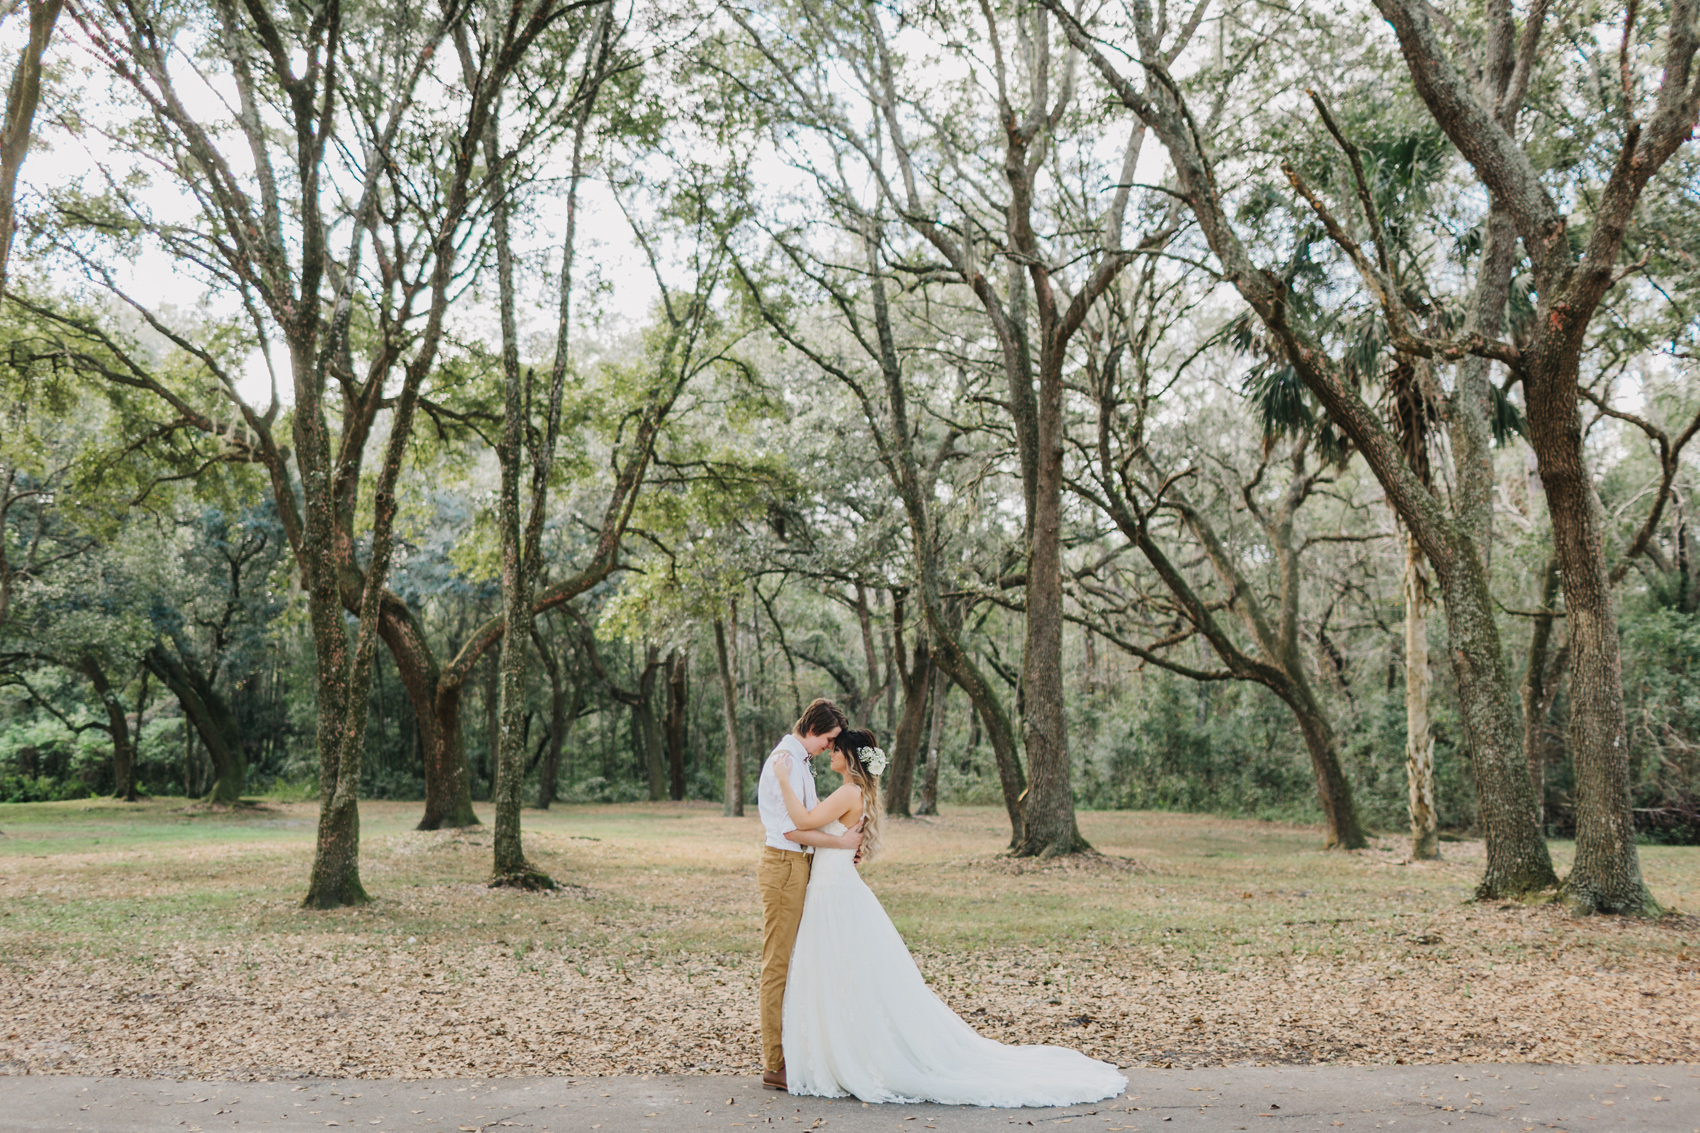 rustic wedding photography in along the beautiful oak trees at the Lange Farm barn wedding venue in Dade City, Florida